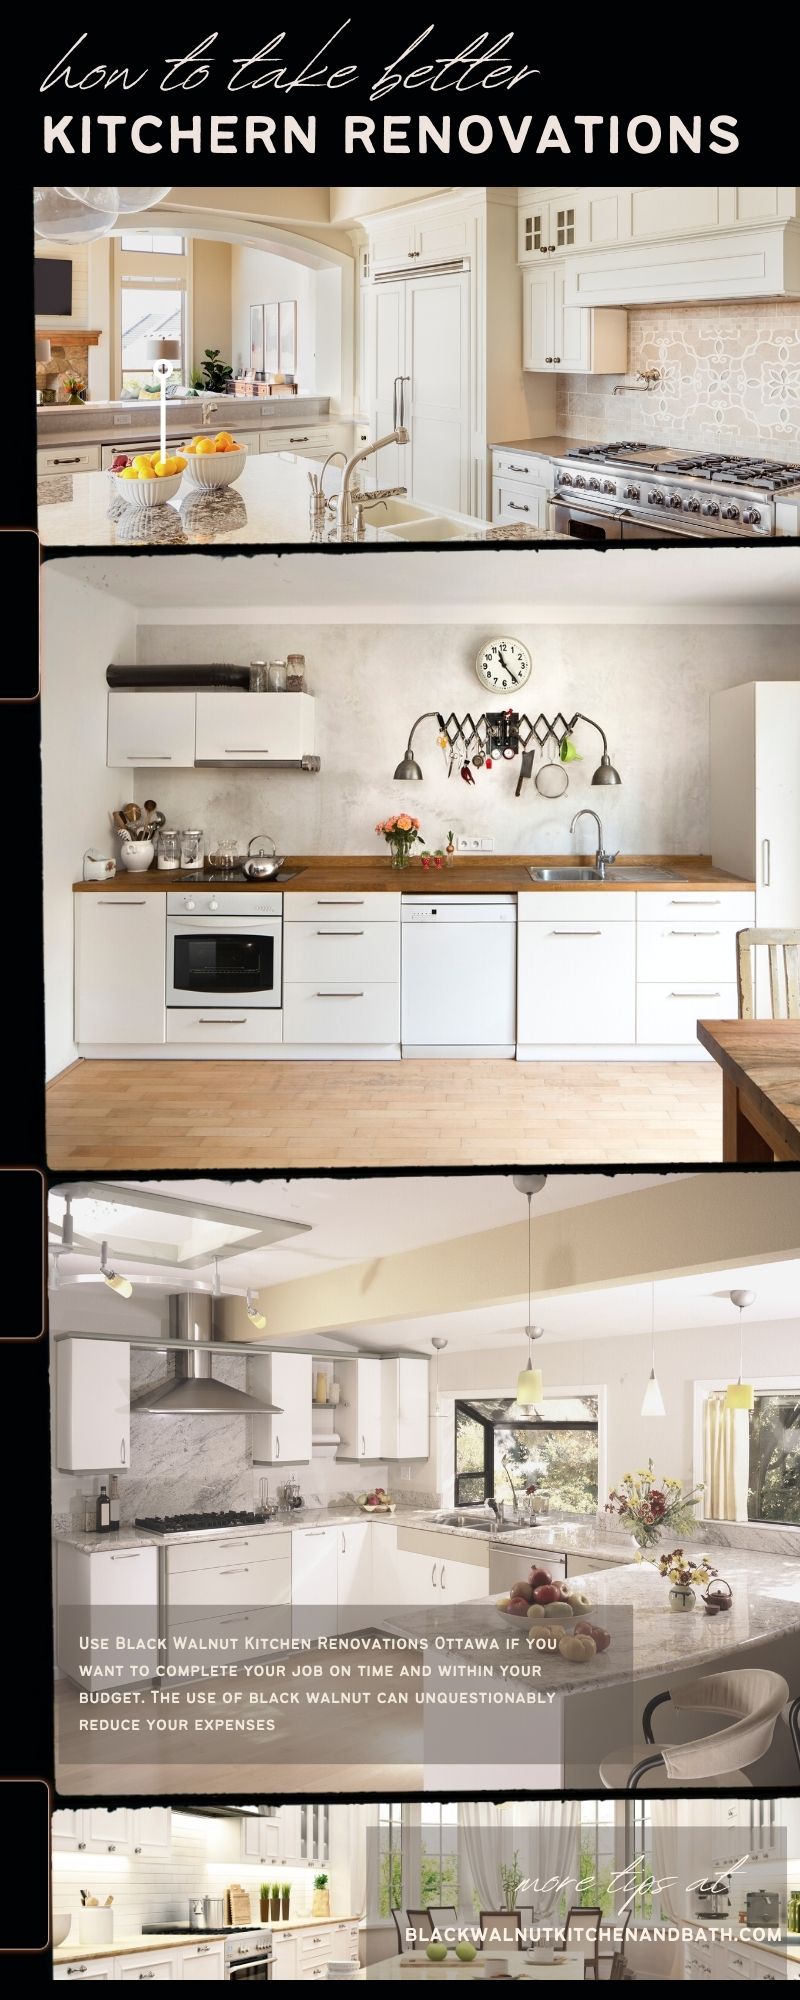 Get a new look for your home with the help of an Ottawa kitchen remodelling business.